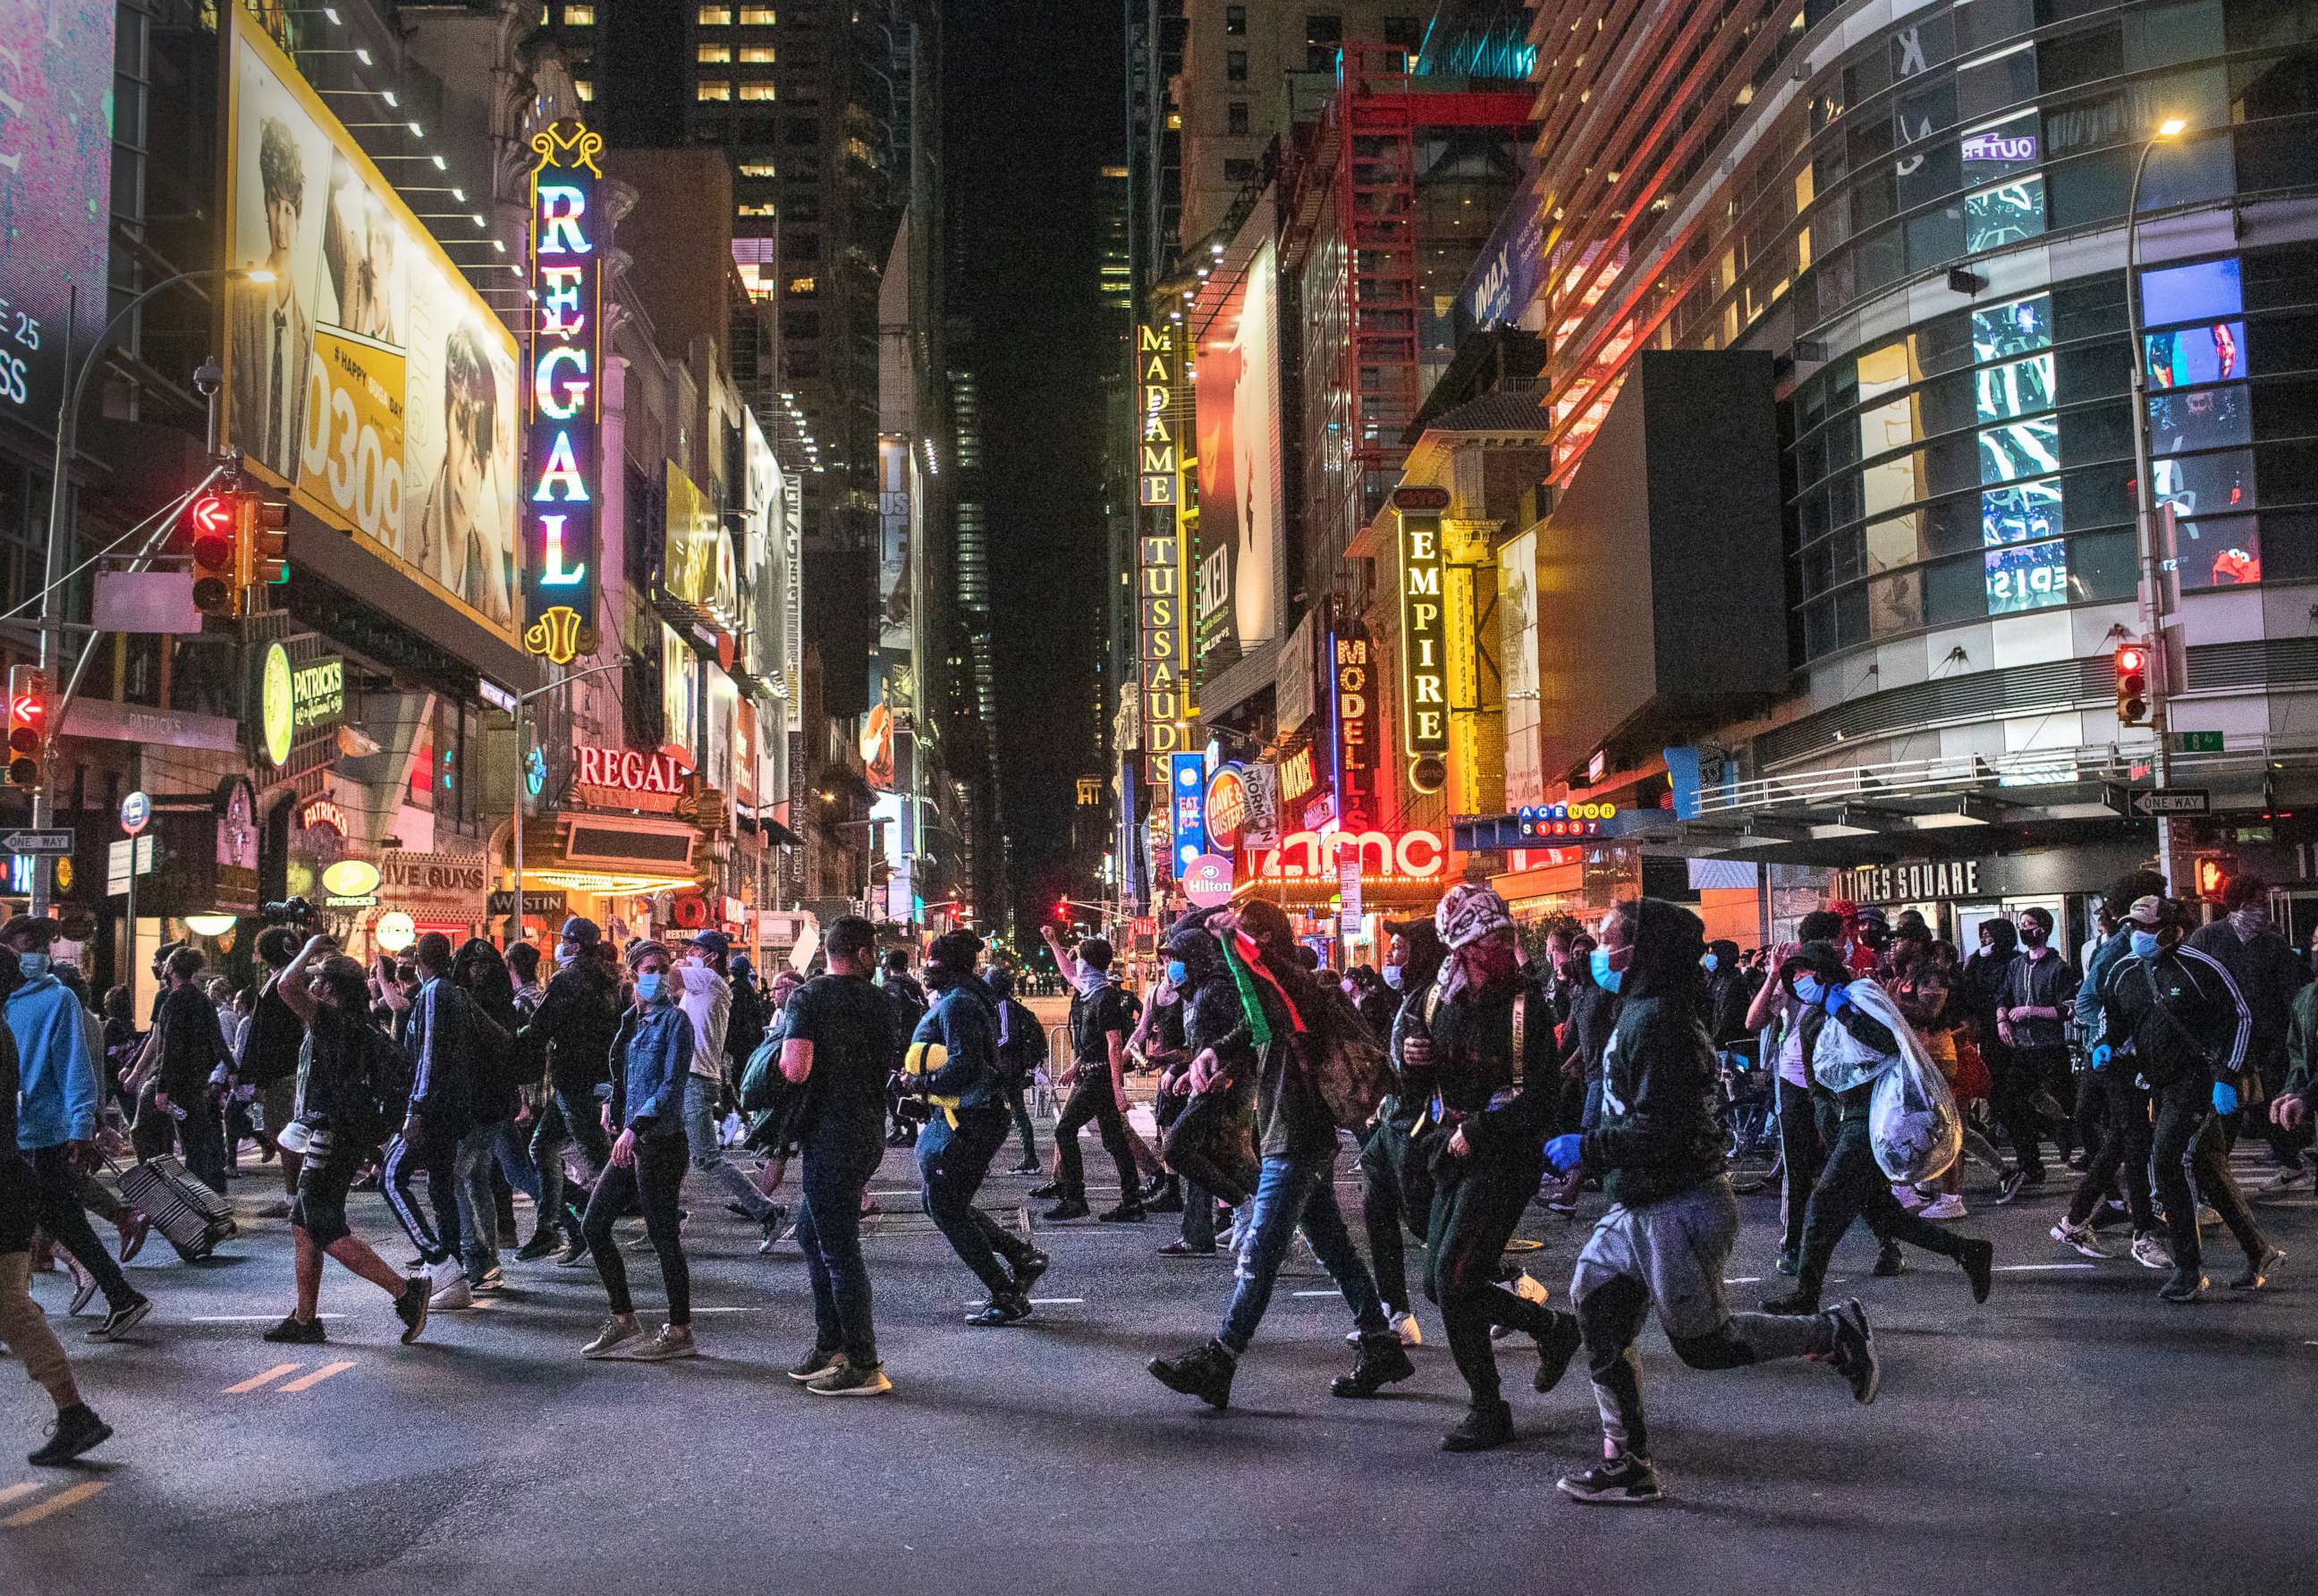 PHOTO: Protesters rush past Times Square after an 11pm curfew during a night of marches and vandalism over the death of George Floyd on June 1, 2020 in New York City.